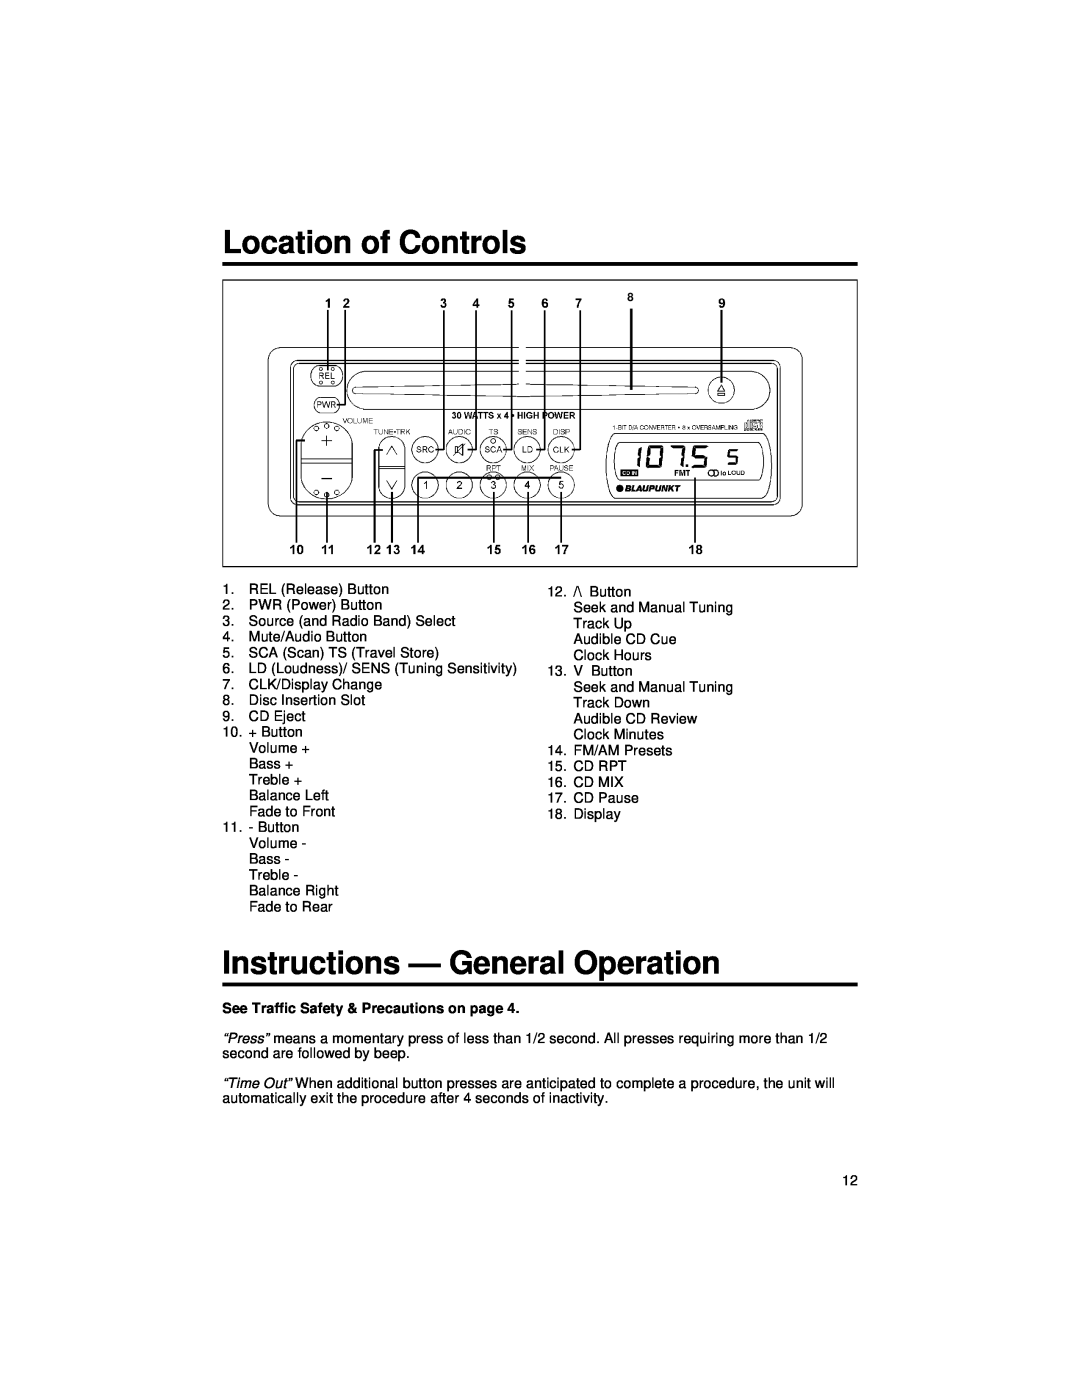 Blaupunkt CD127 manual Location of Controls, Instructions - General Operation, See Traffic Safety & Precautions on page 